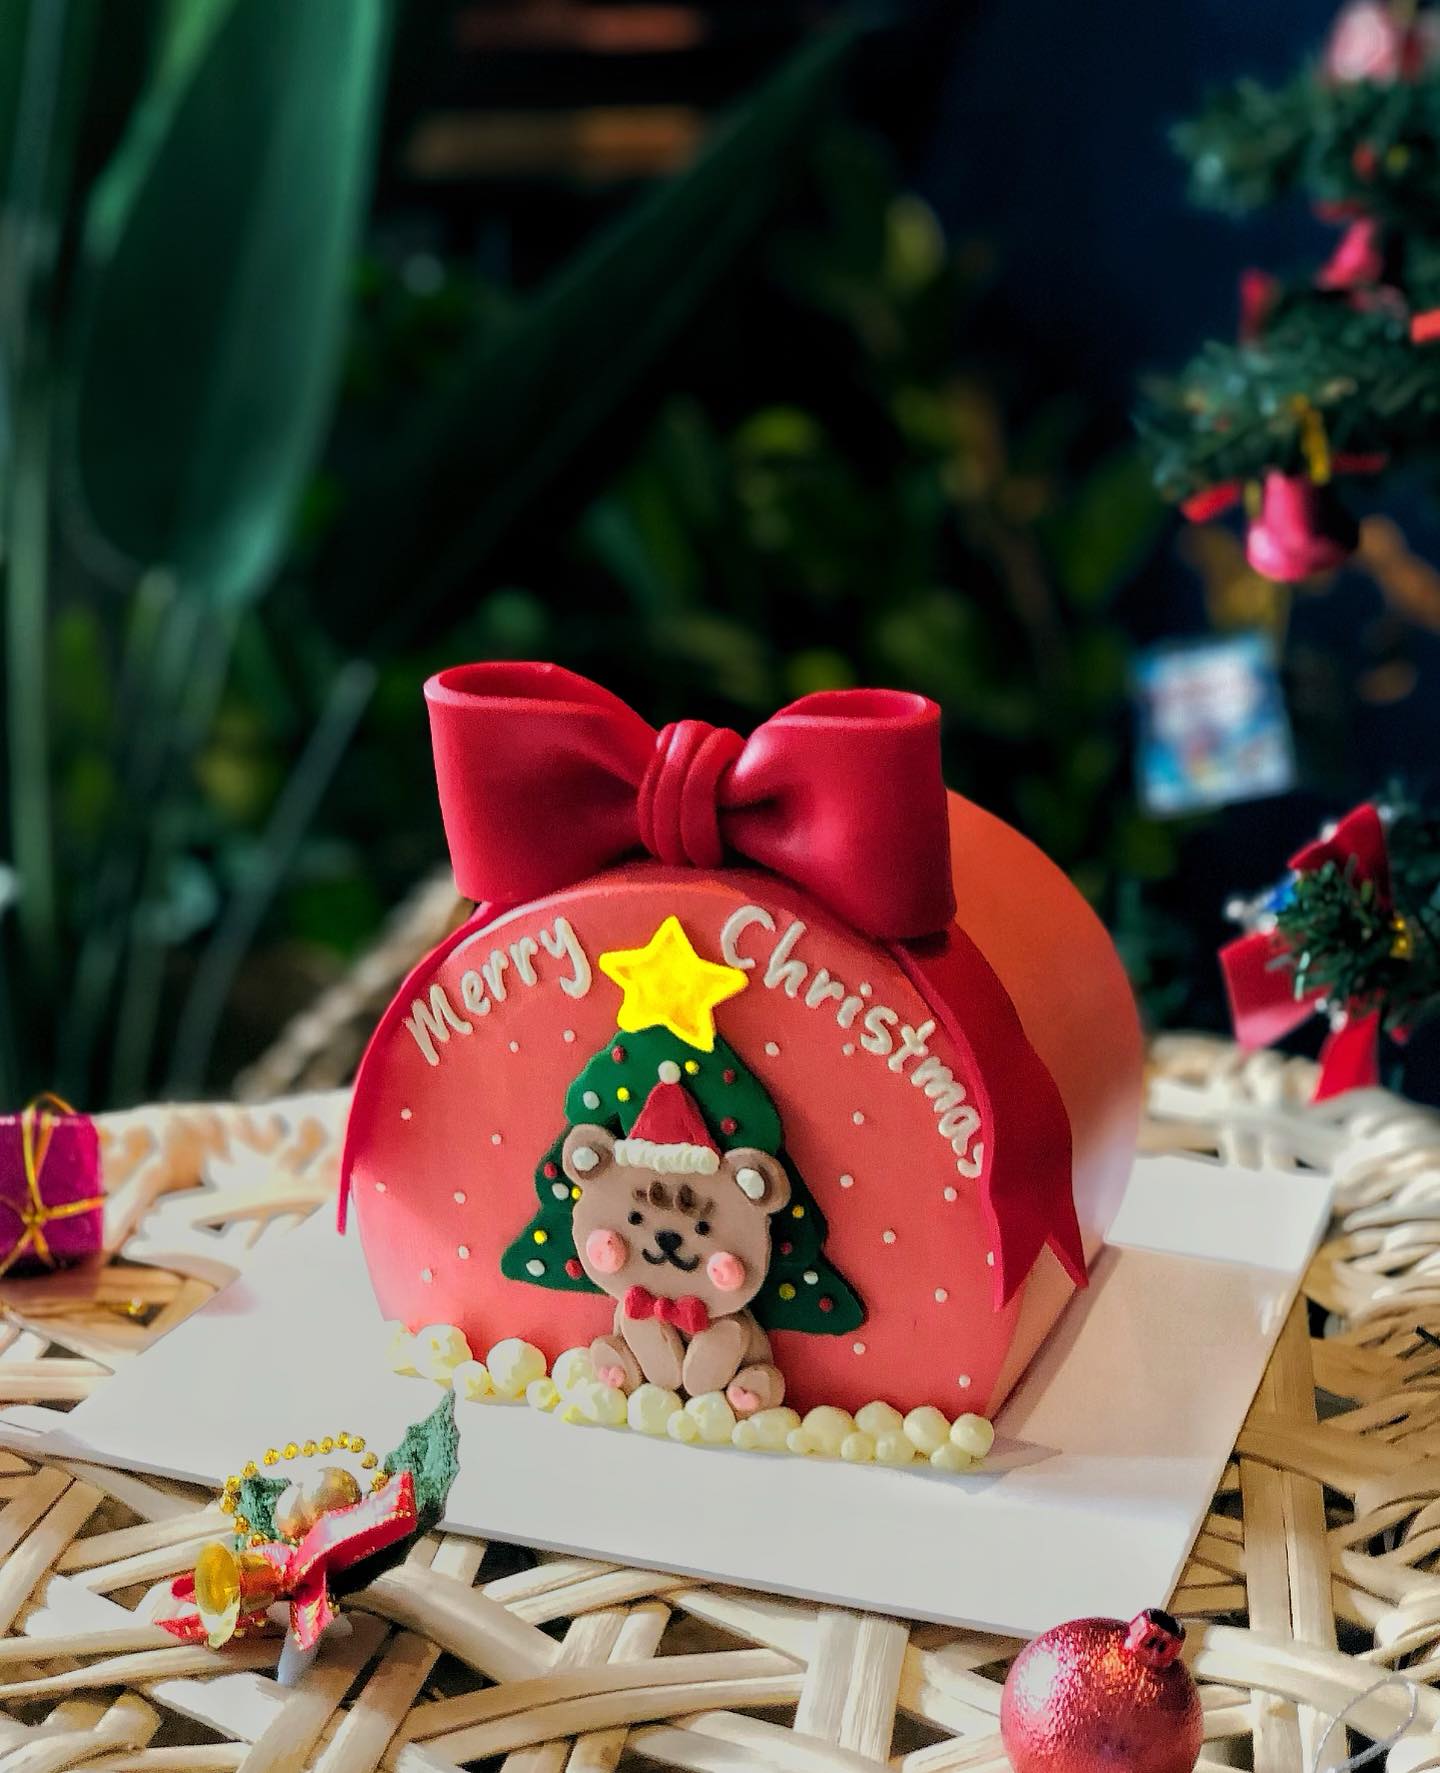 Merry Berry cake - Christmas cookies and cakes